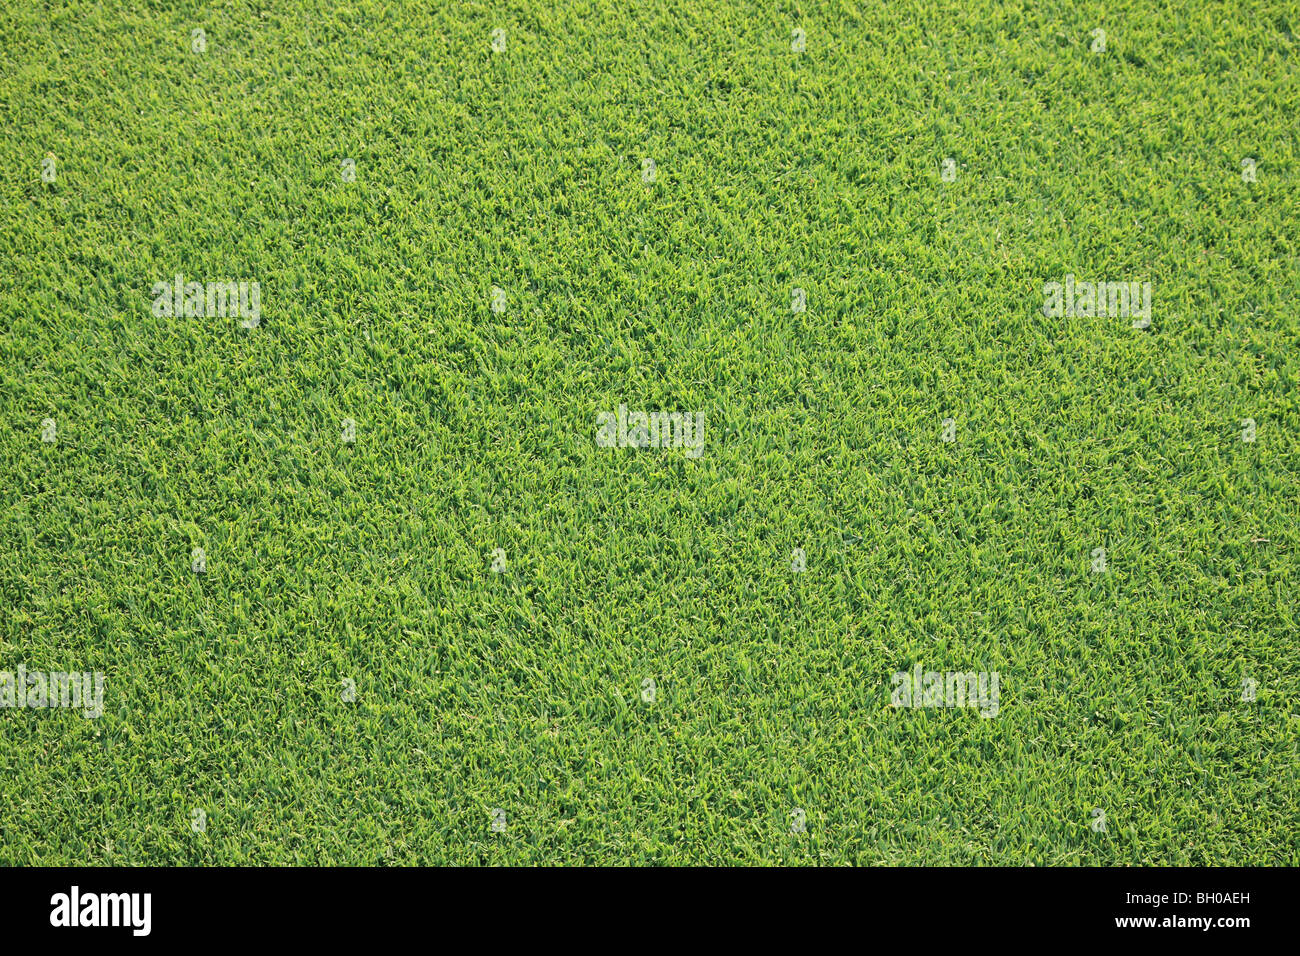 grass on golf course Stock Photo